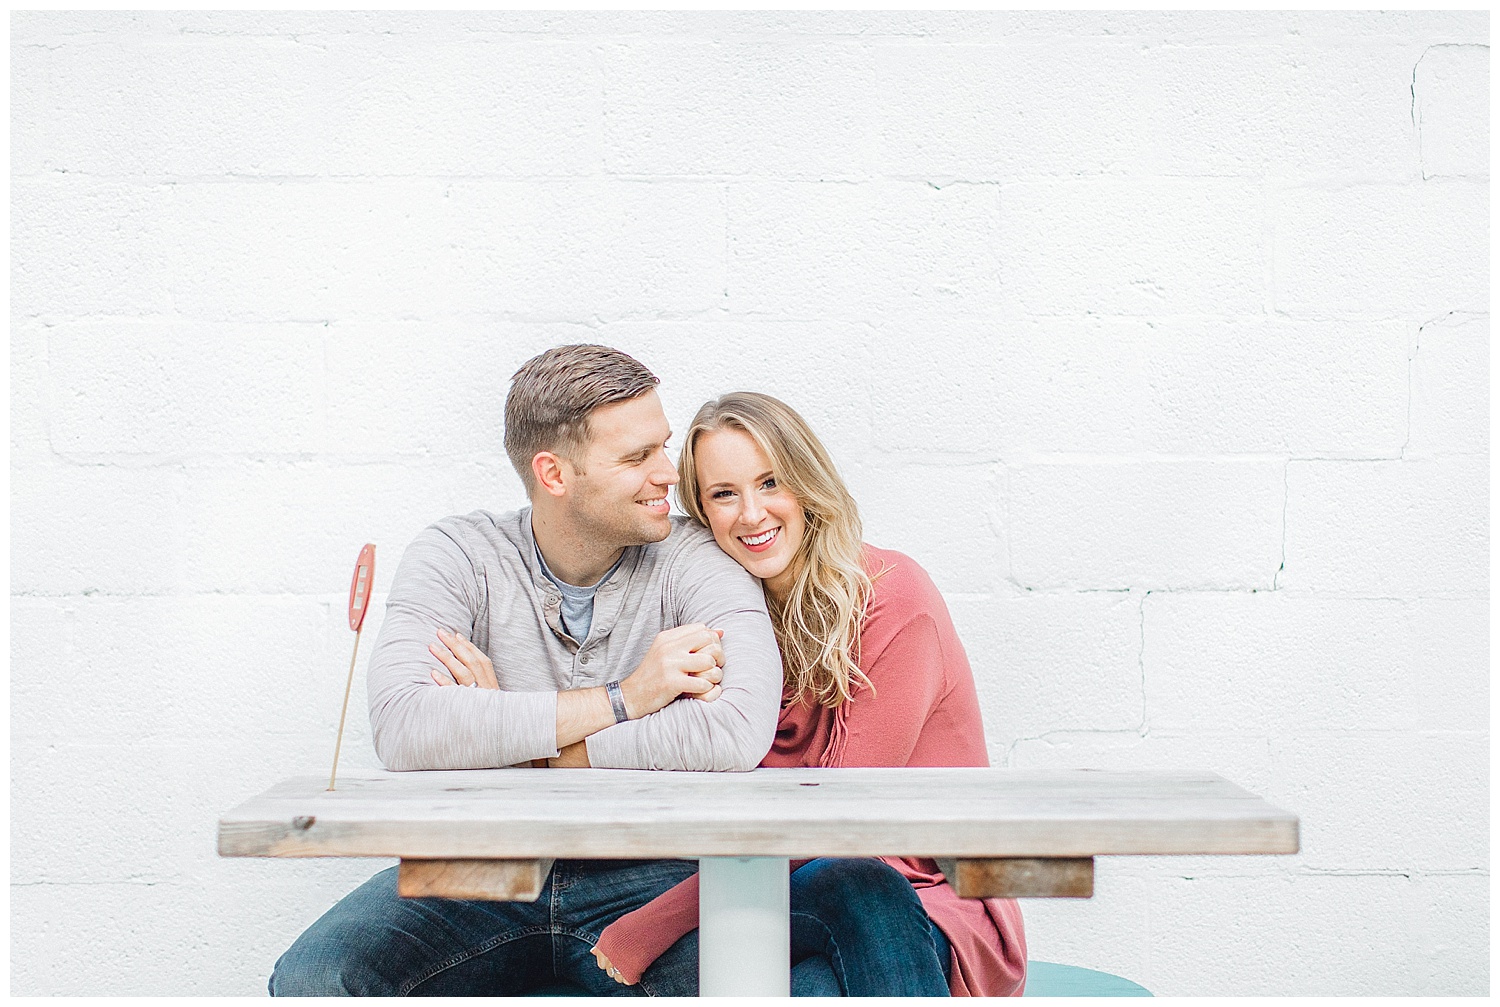 ERC_0790_Downtown Nashville Engagement Session at Barista Parlor | Emma Rose Company Wedding Photographer | Outfit Inspiration for Engagement Session | Kindred Light and Airy Photographer.jpg